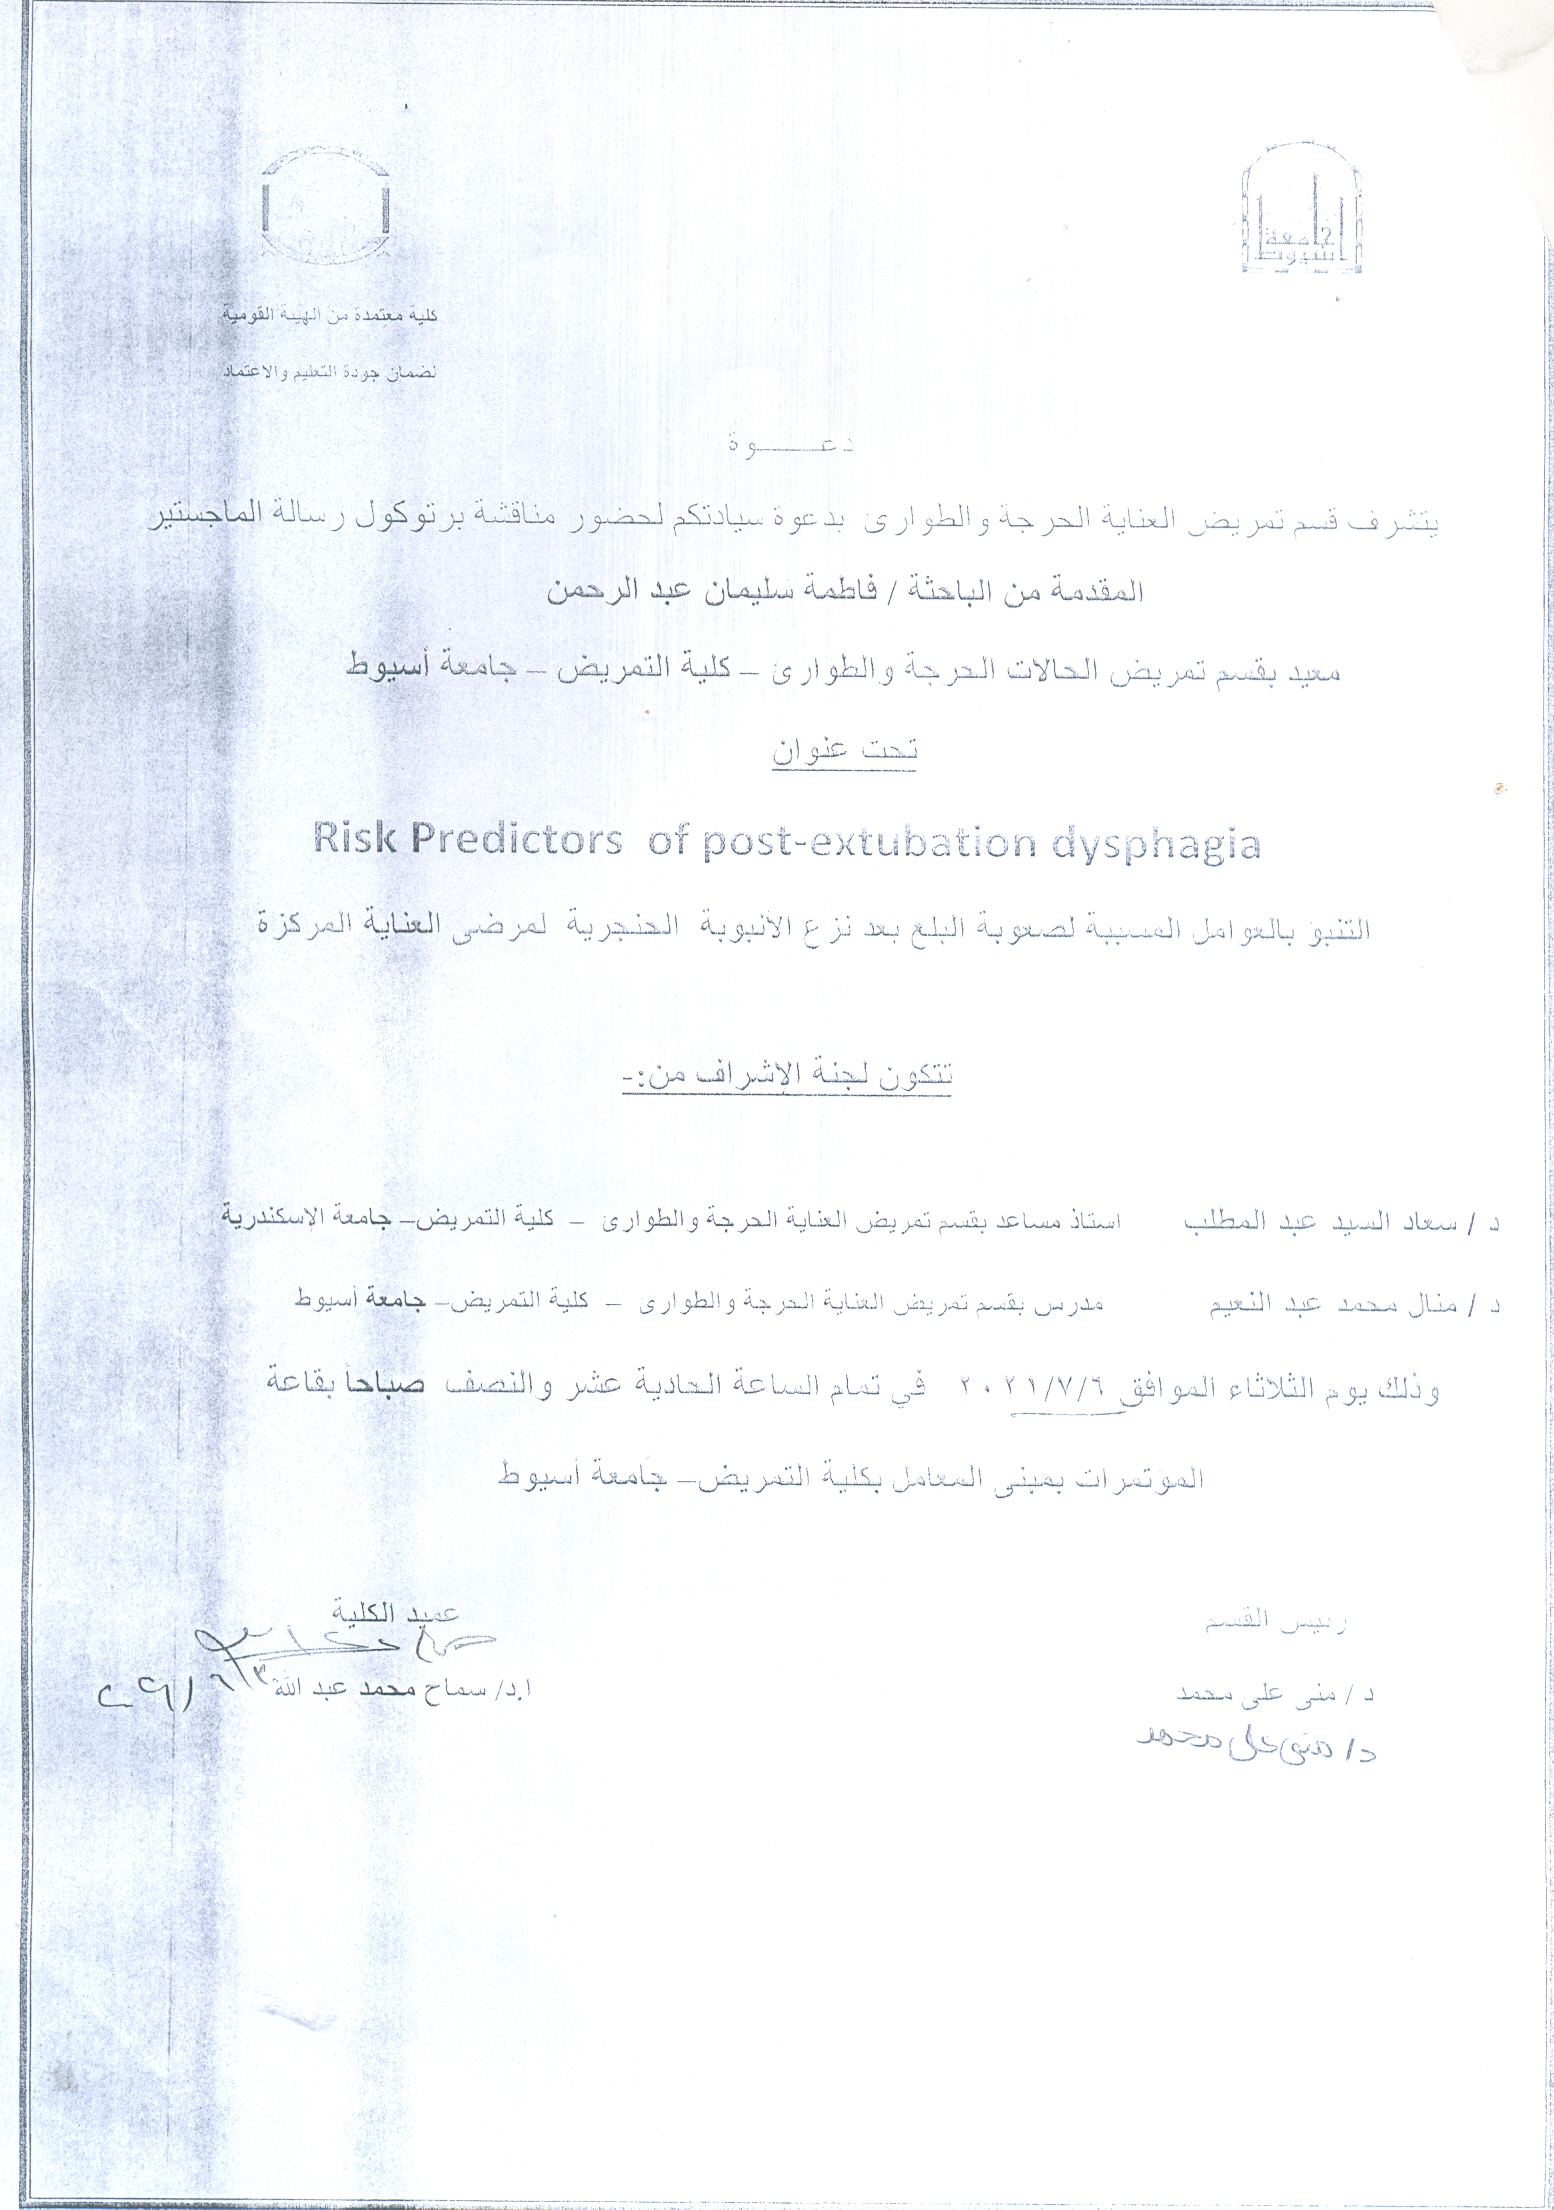 Protocol of master thesis submitted by researcher/ Fatima Suleiman Abdul Rahman